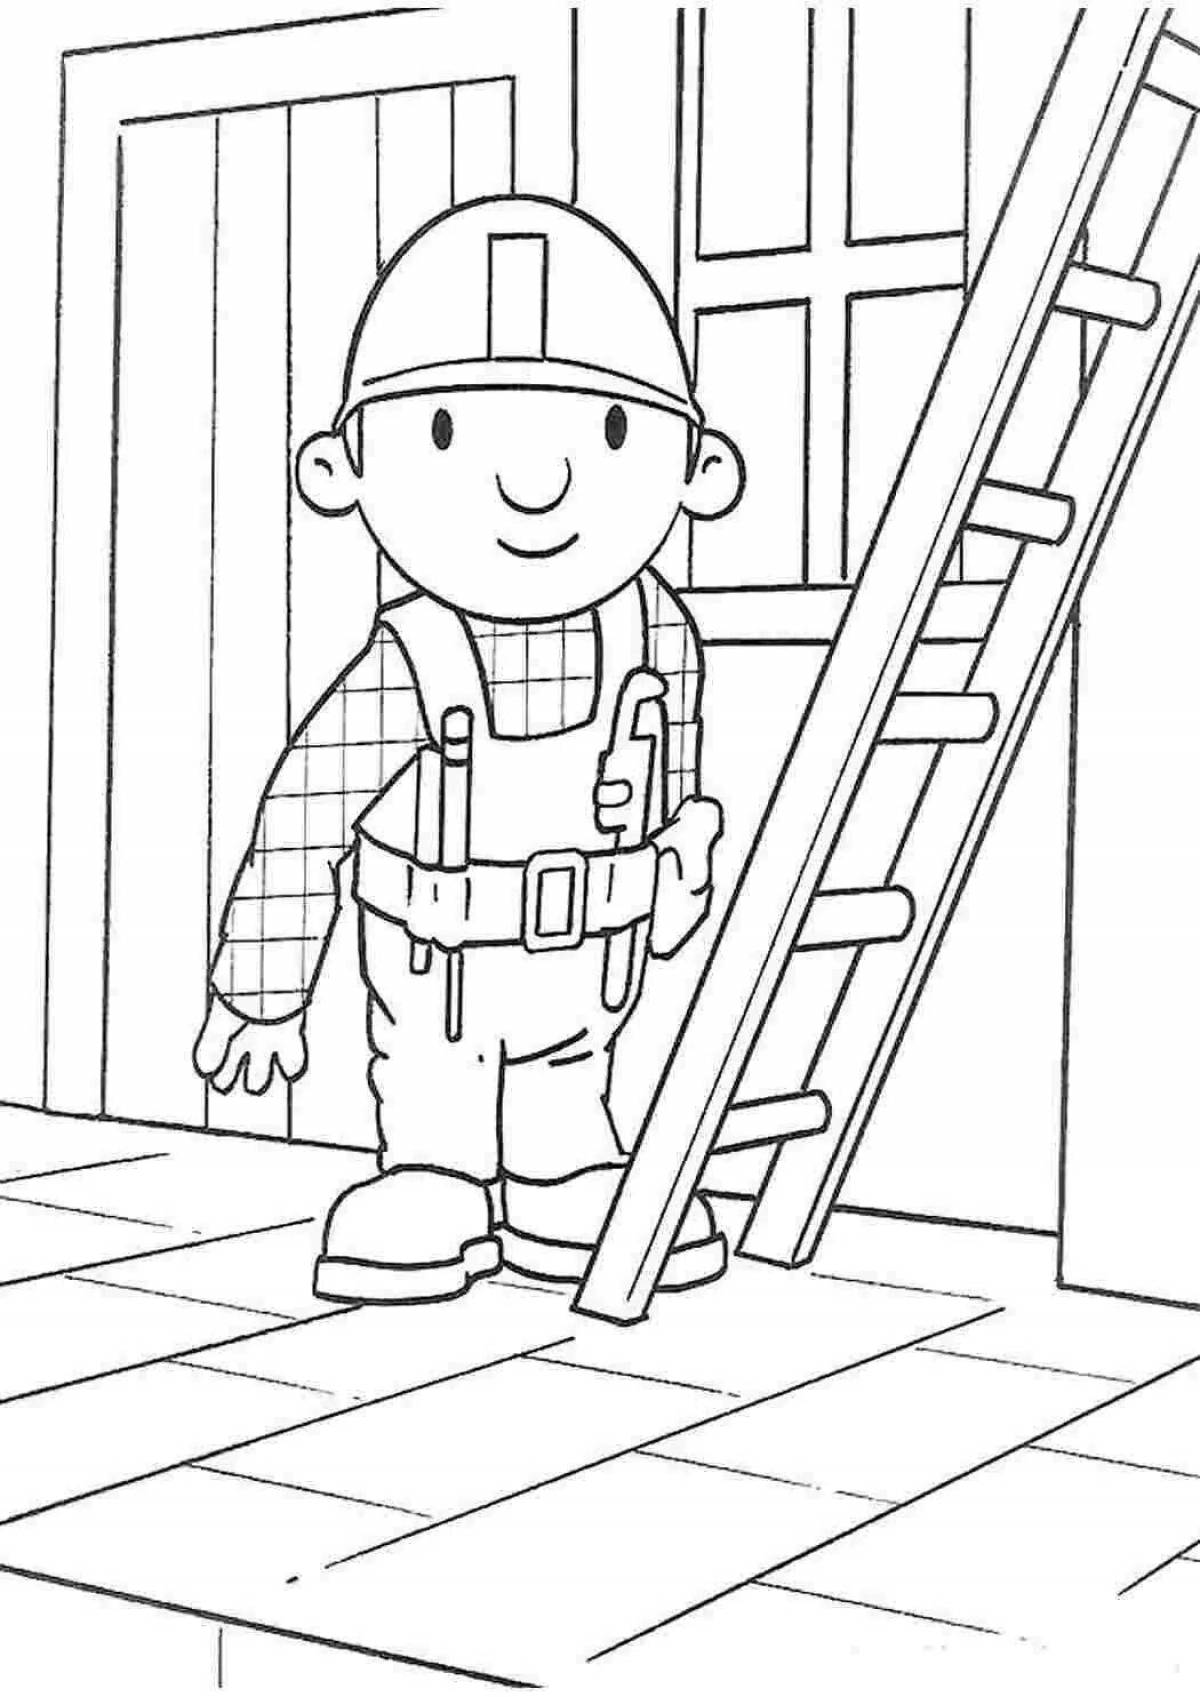 Charming safety coloring book for kids